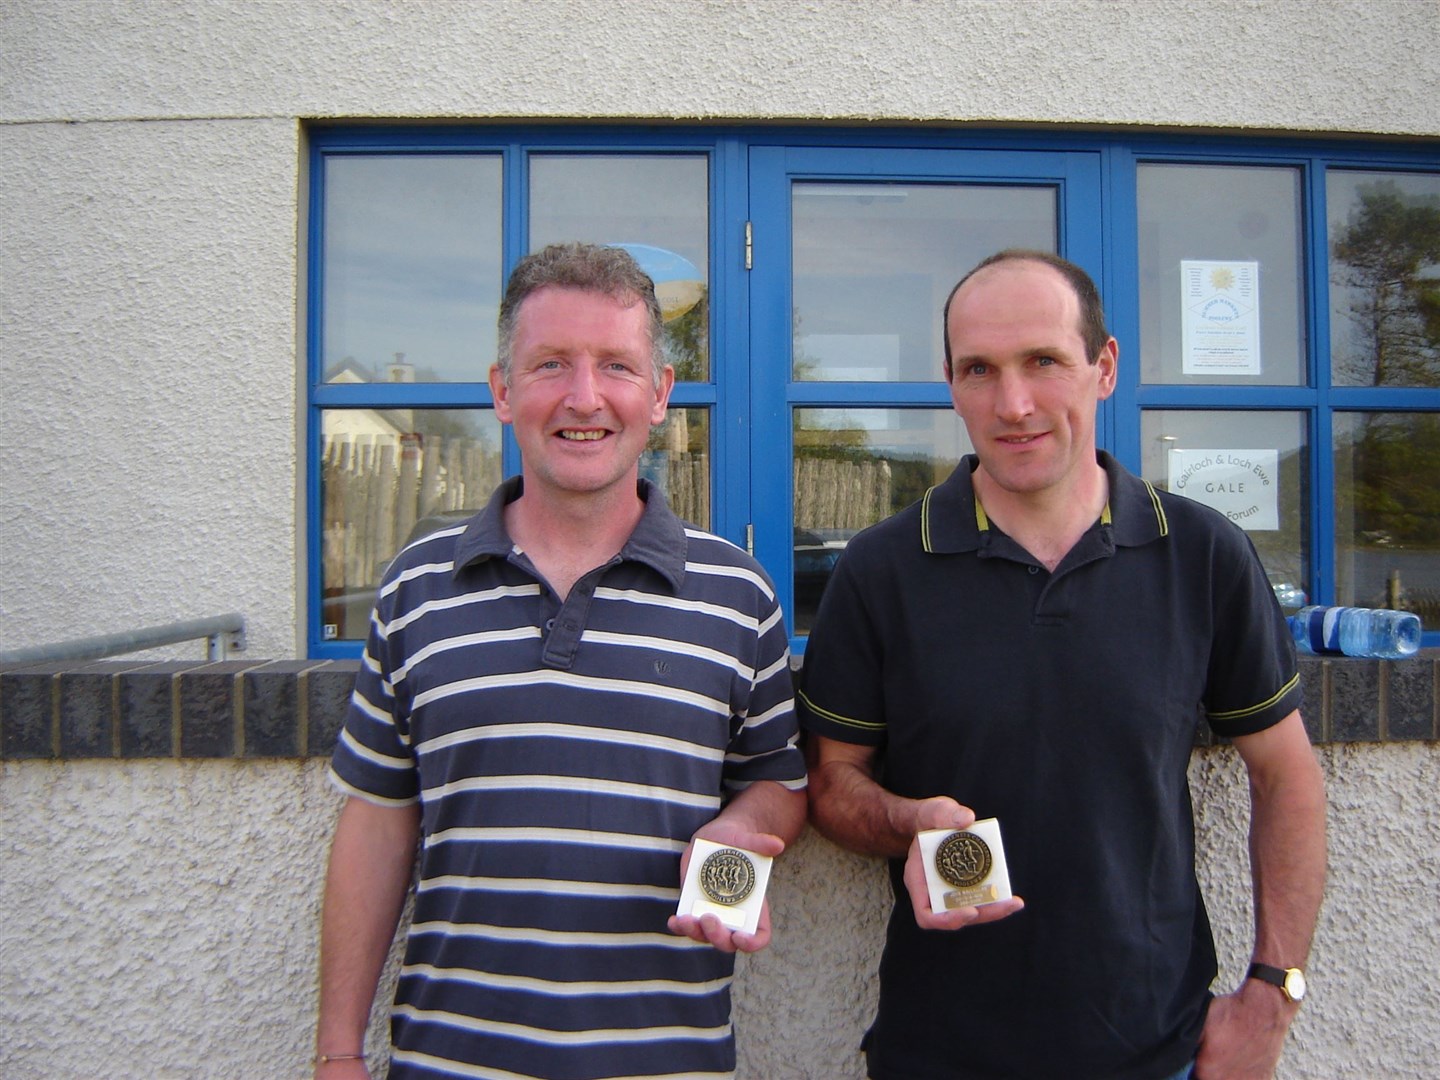 Kenny Mitchell and John Maclellan have completed all 33 events to date.